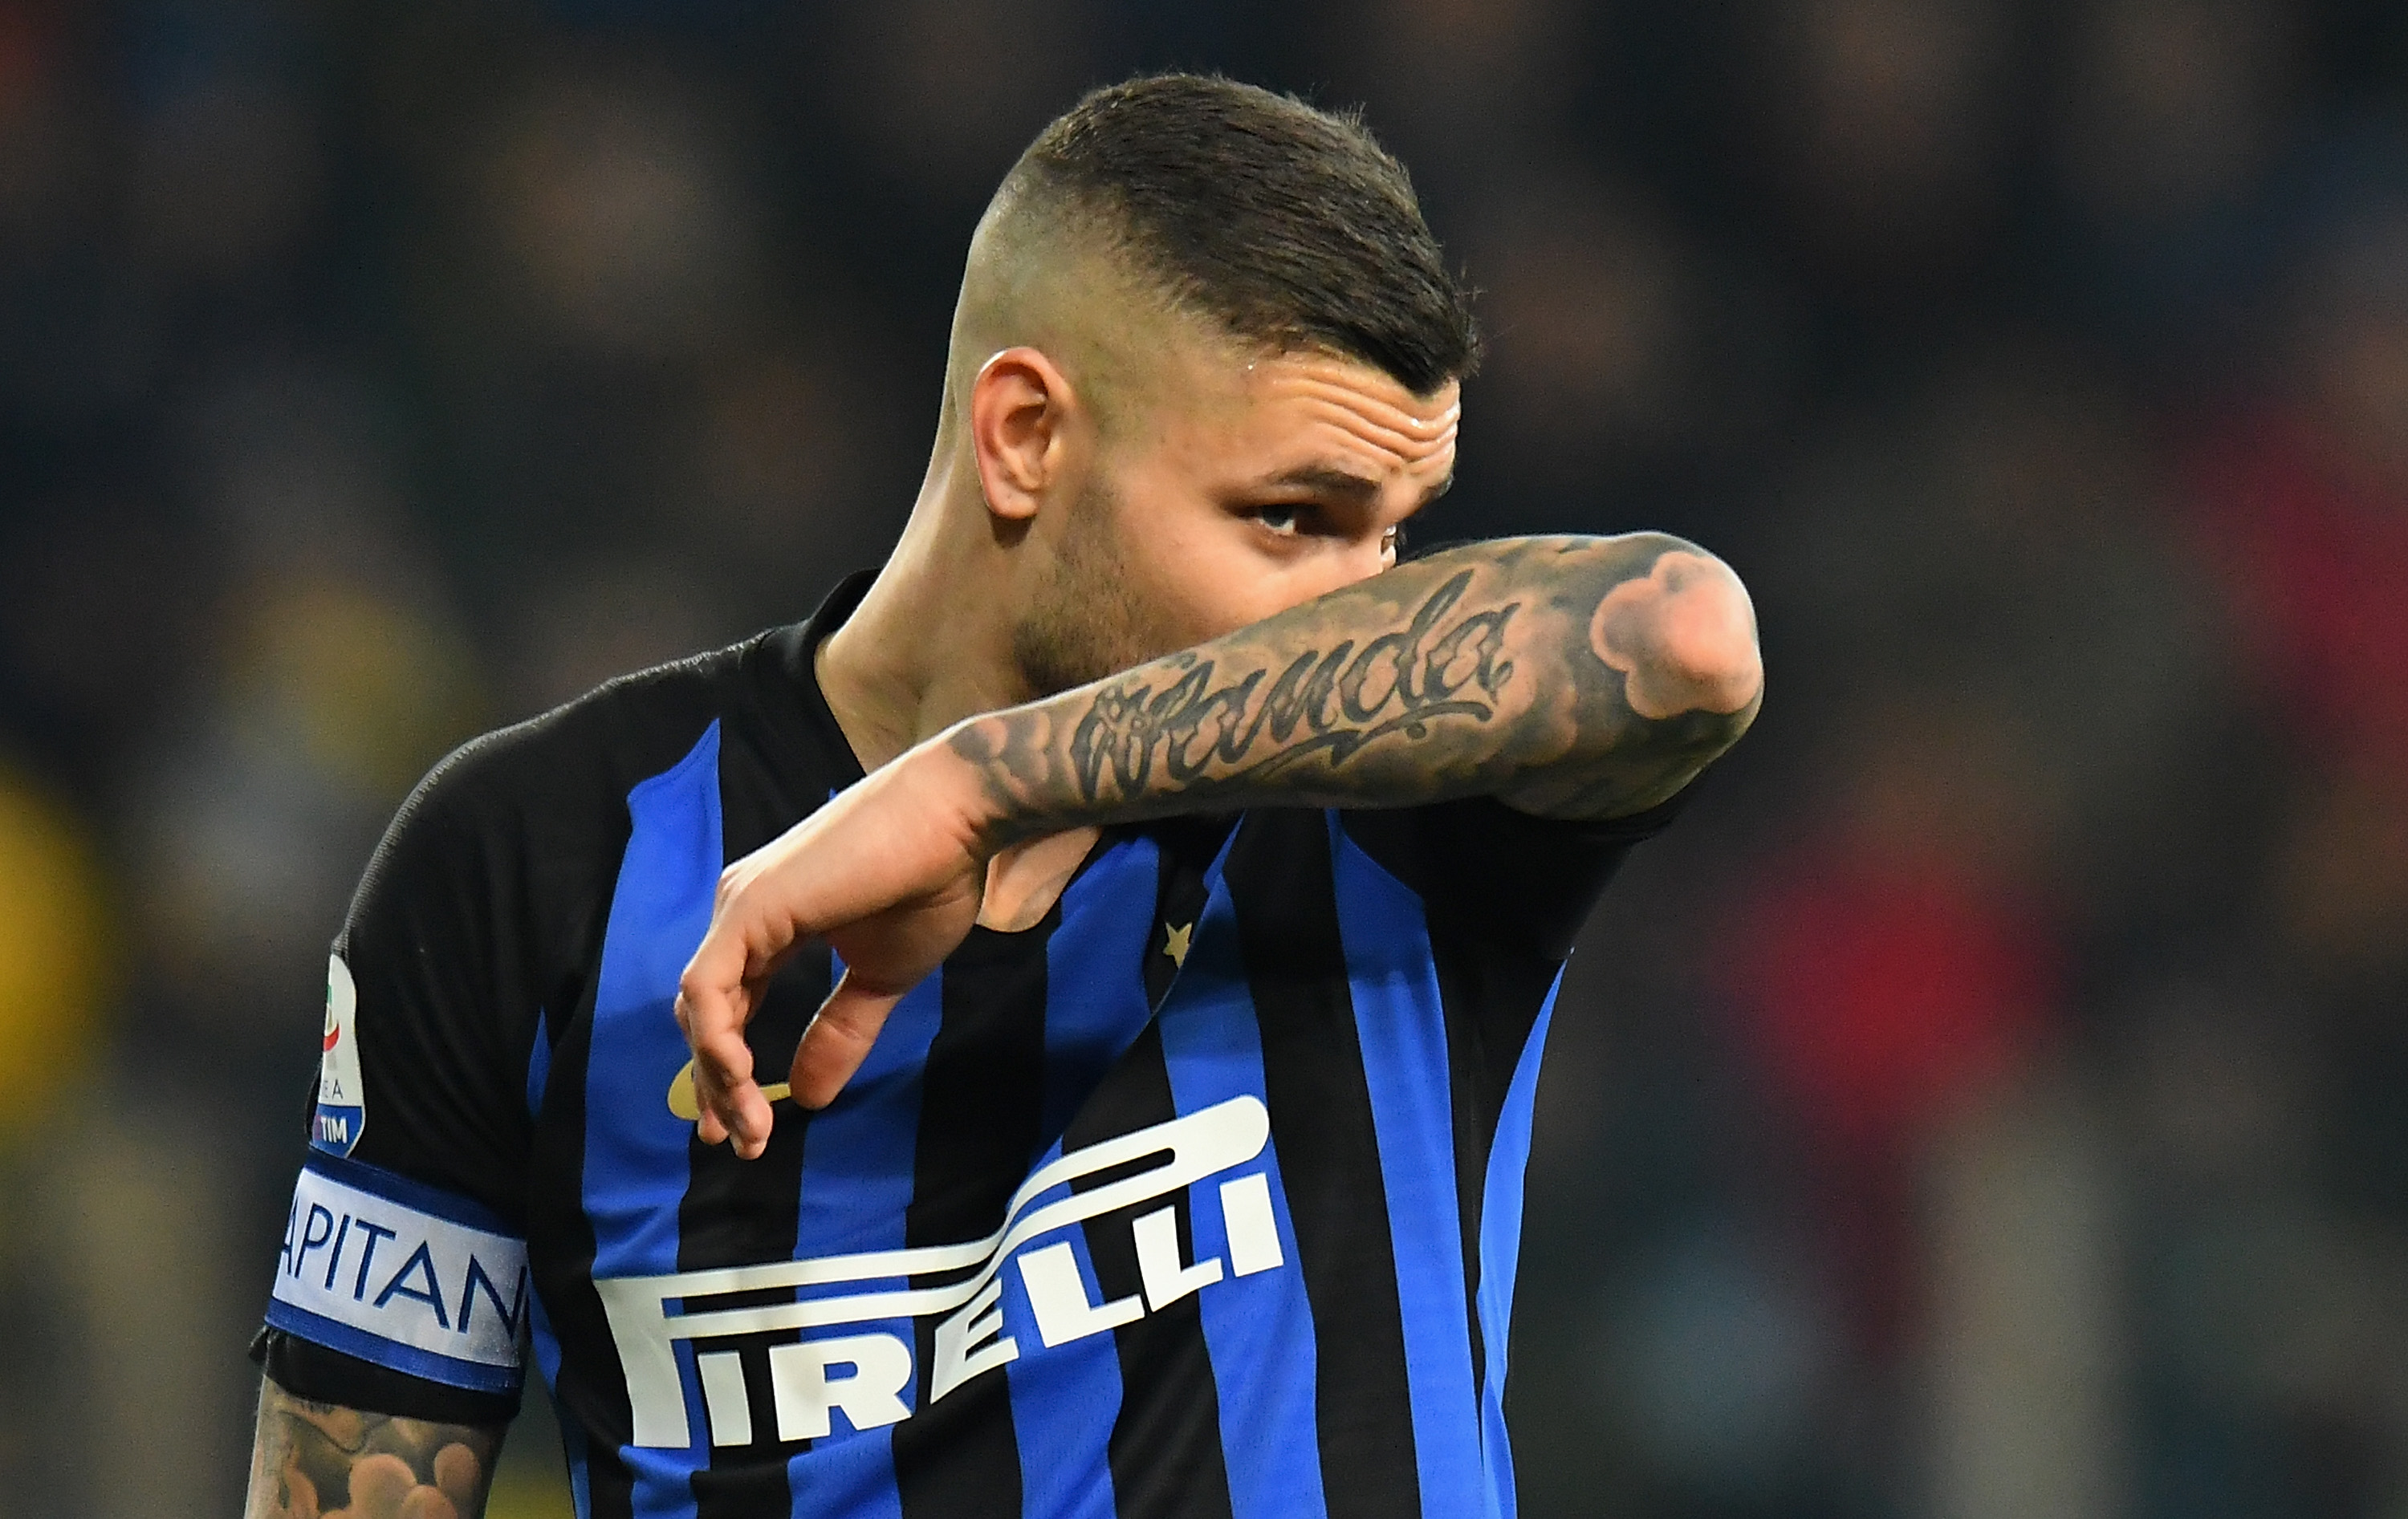 Icardi was stripped off of captaincy duties at Inter last season (Photo by Alessandro Sabattini/Getty Images)